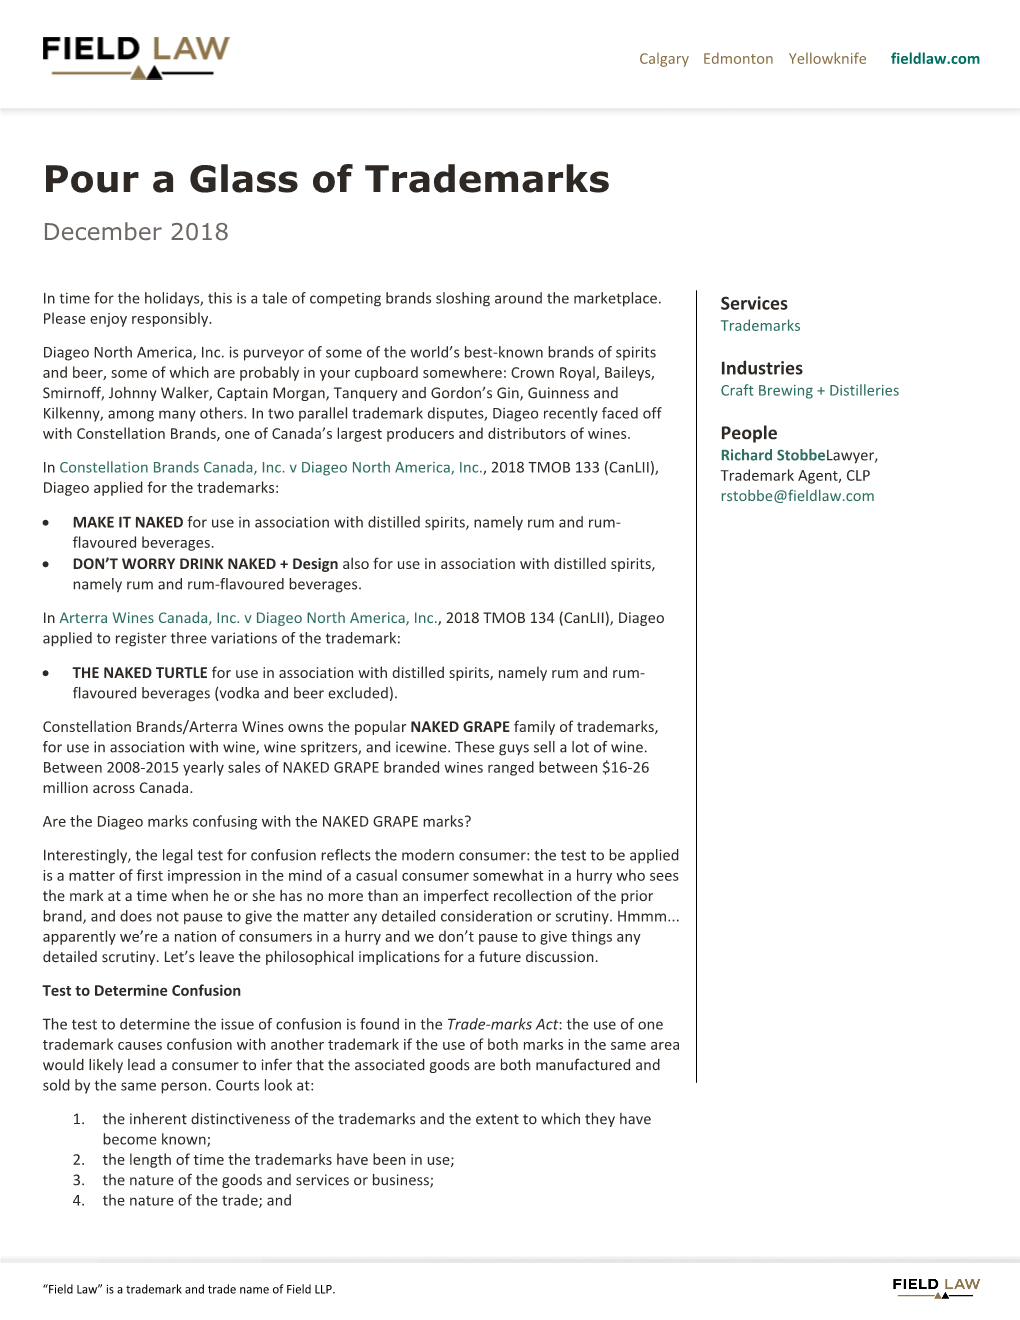 Pour a Glass of Trademarks December 2018